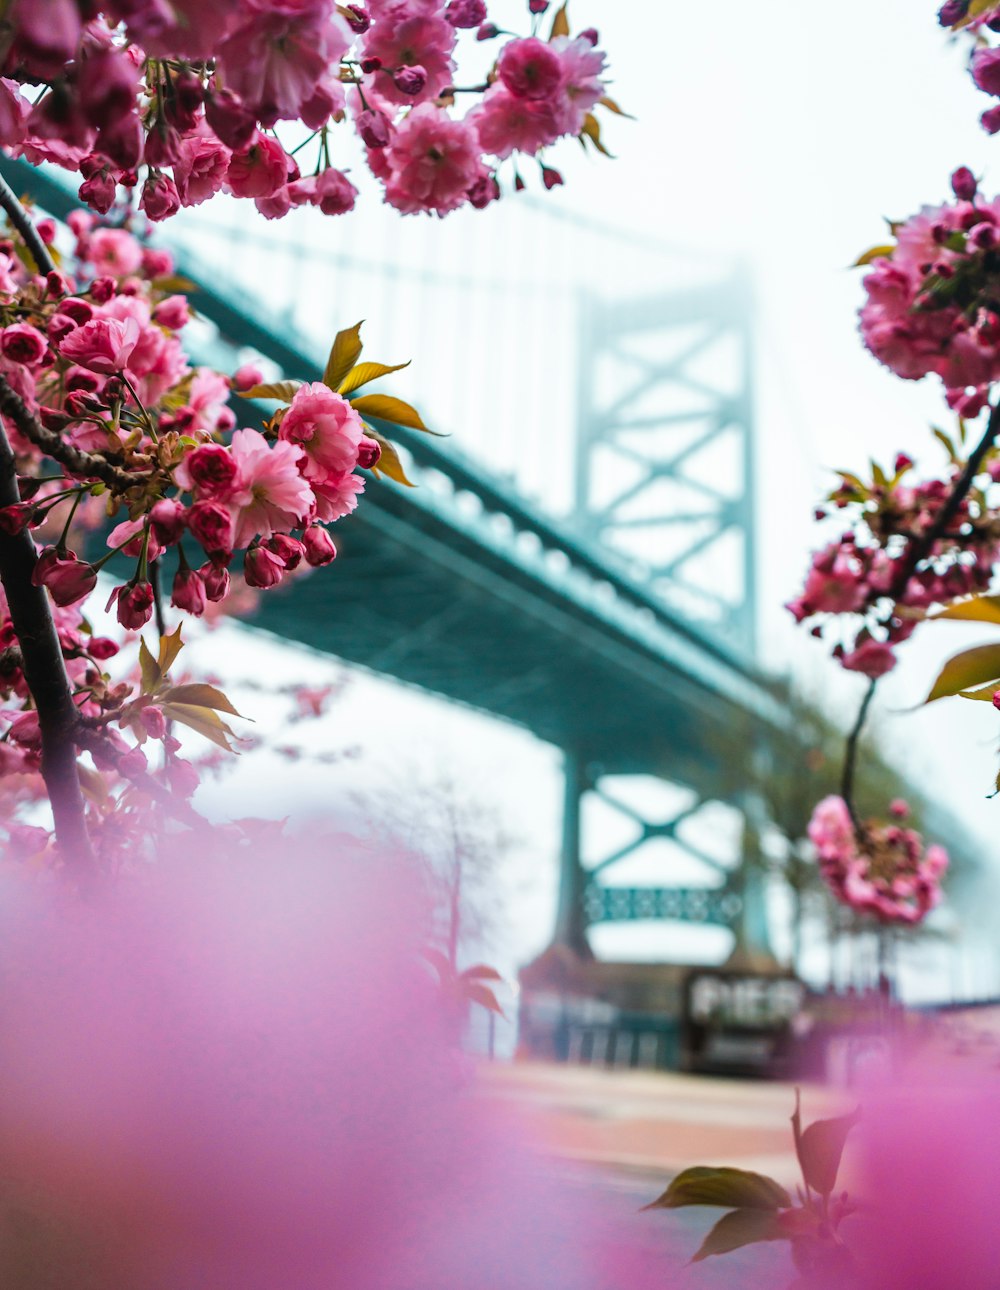 selective focus photography of pink-petaled flowers with a bridge in the background